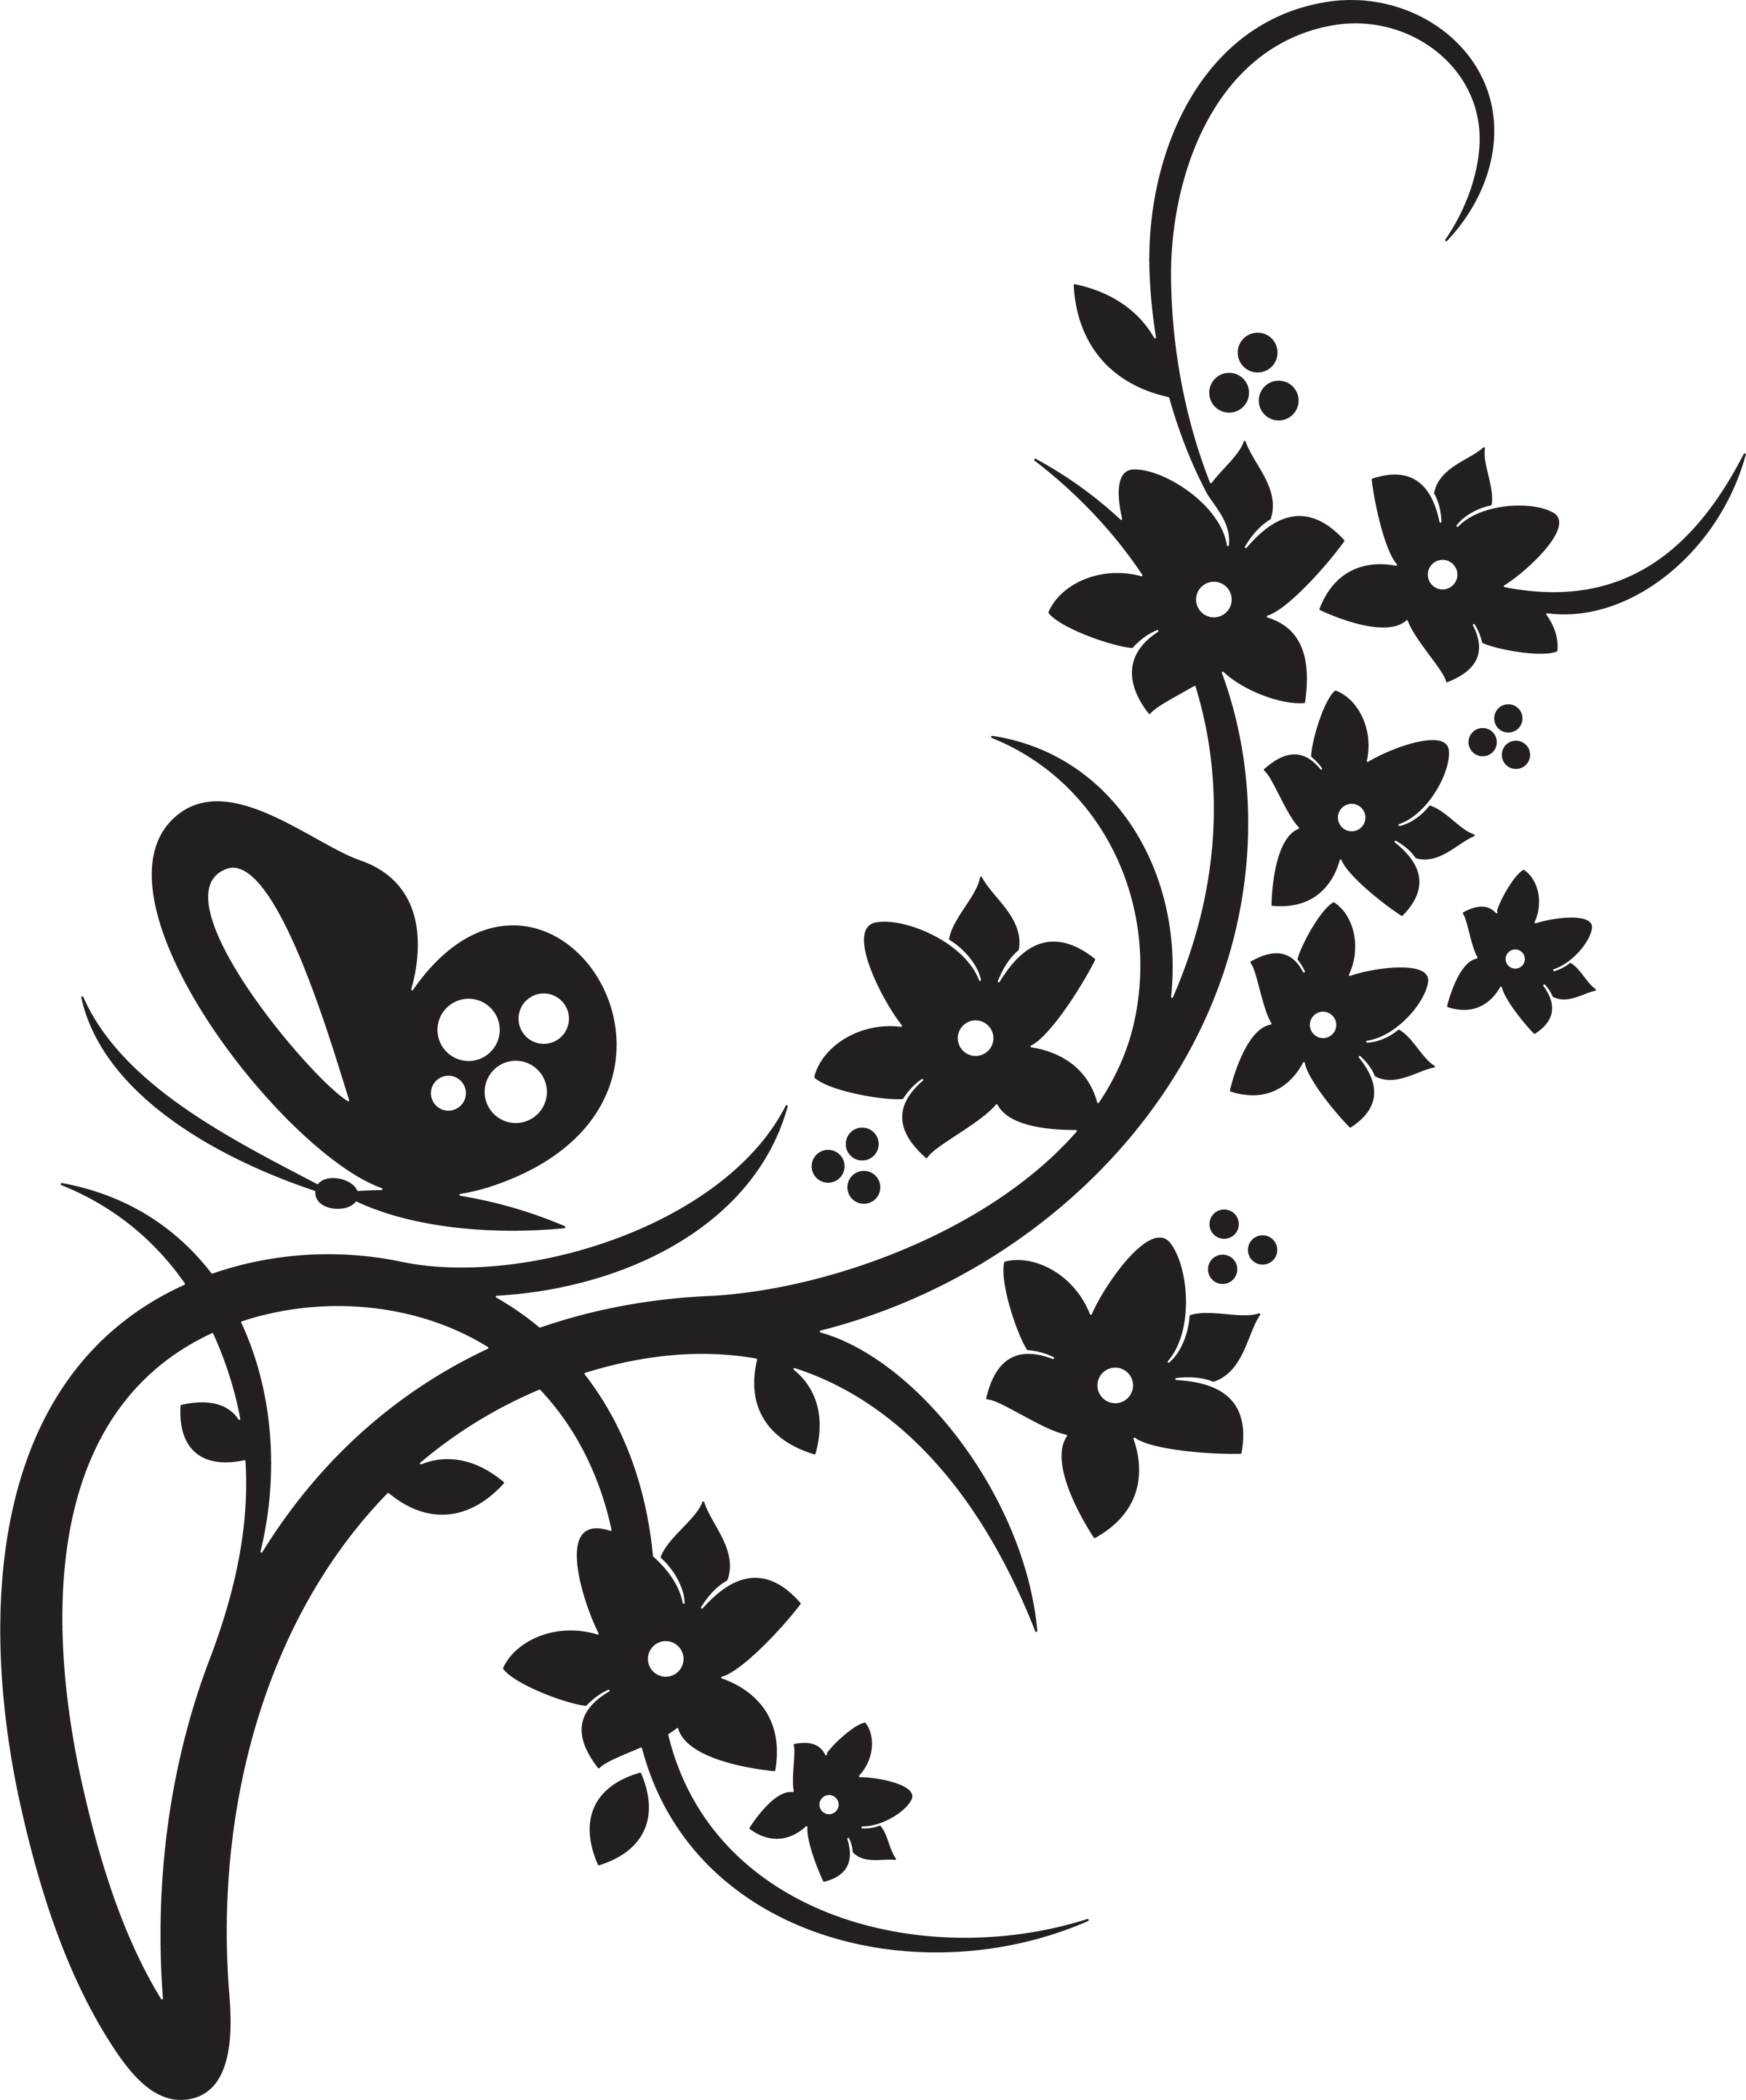 Free Floral Cliparts, Download Free Clip Art, Free Clip Art